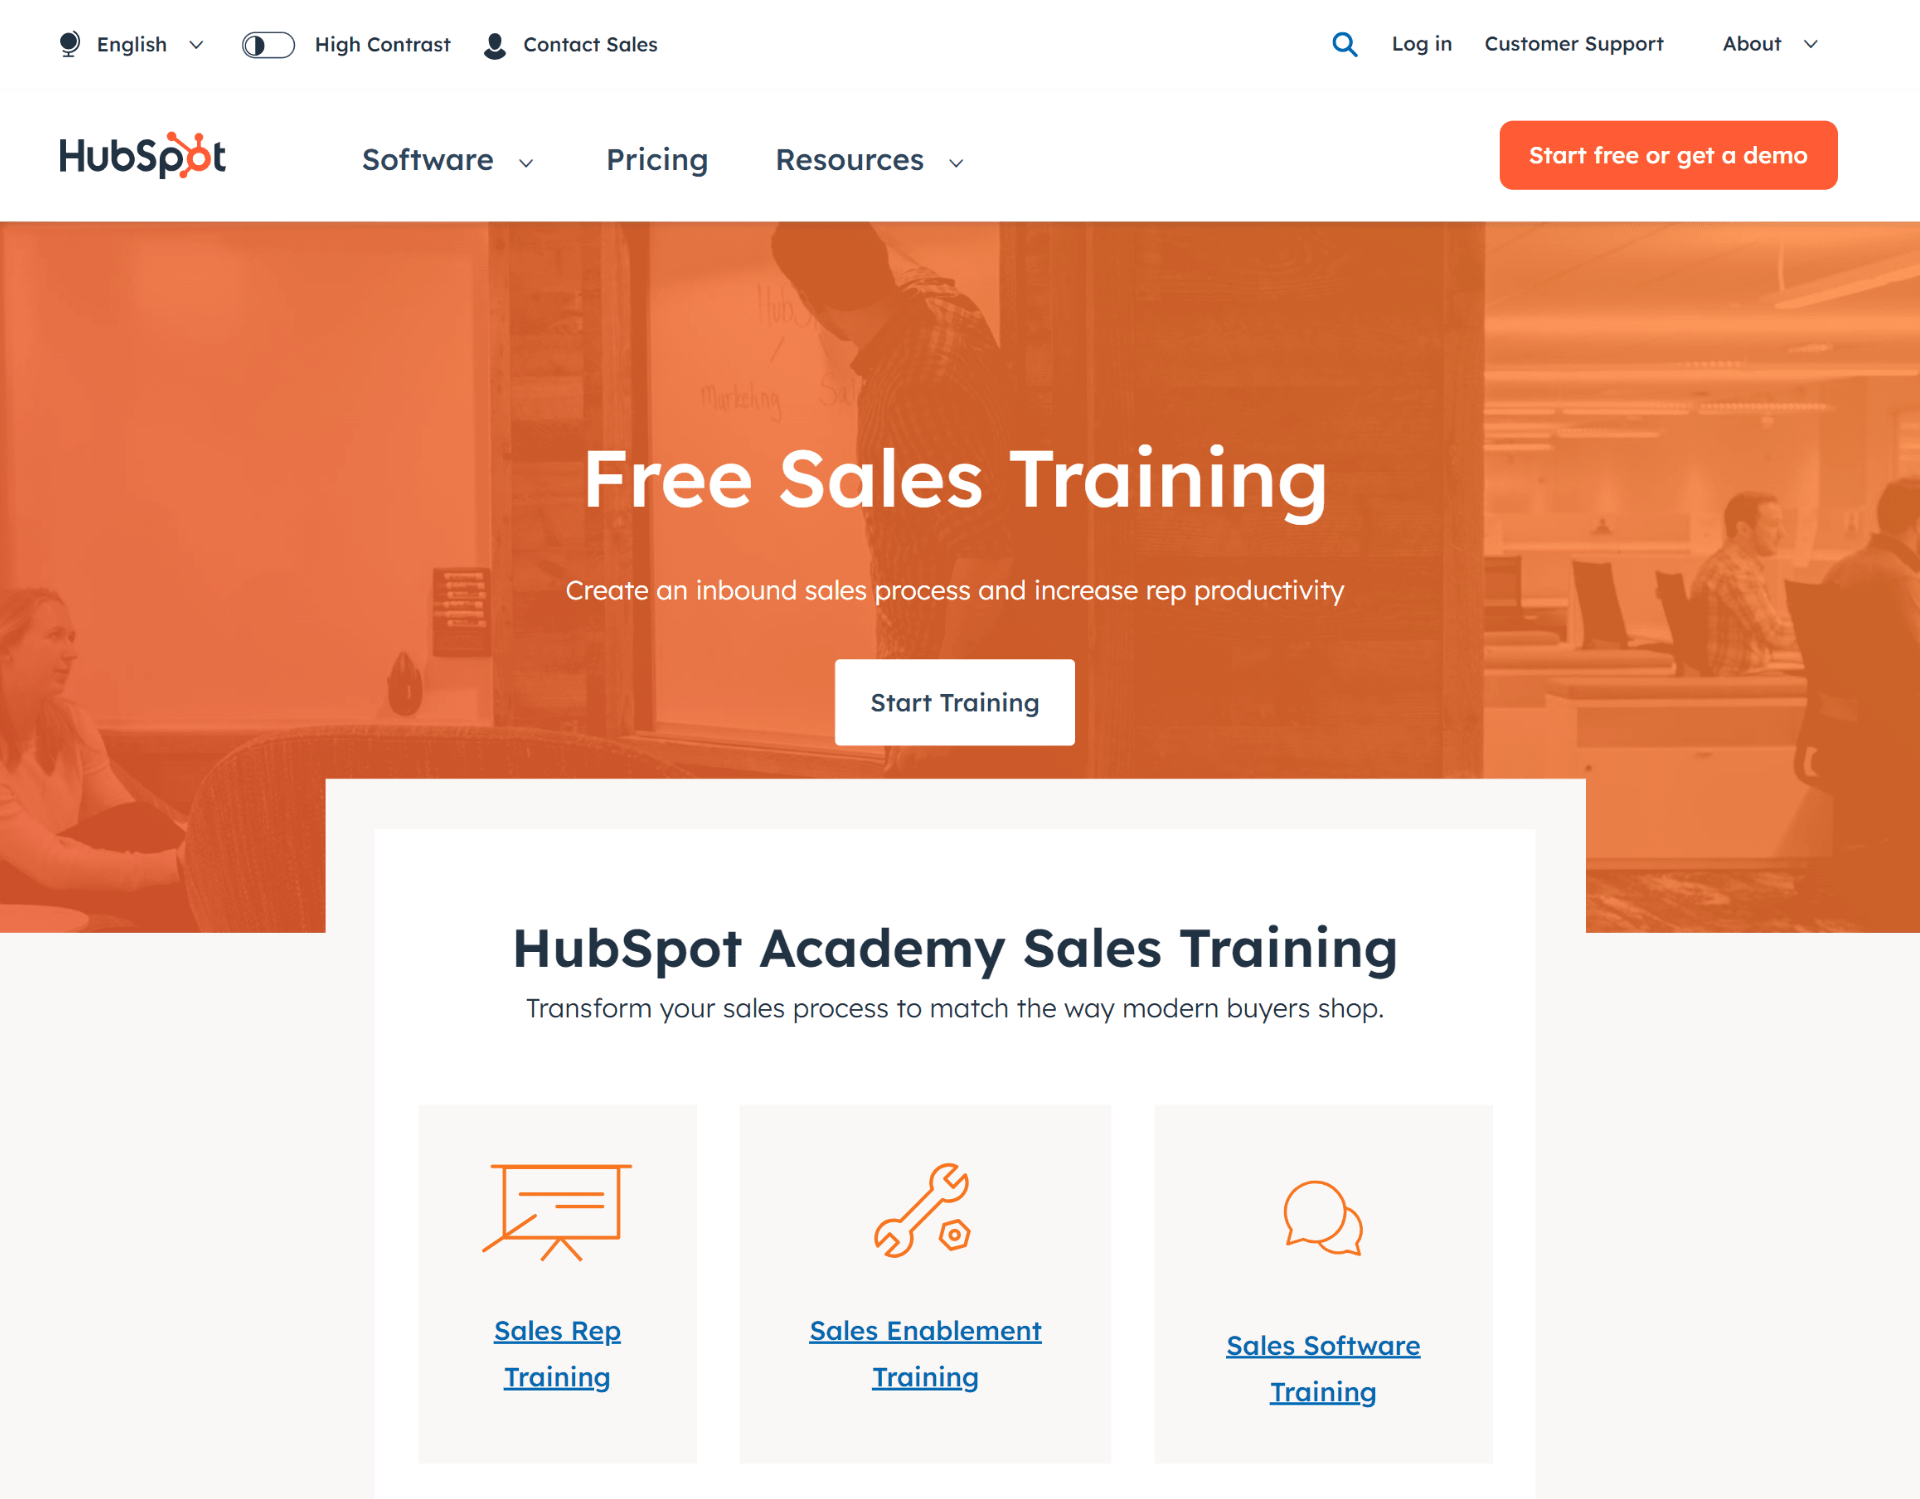 Sales Training by HubSpot Academy